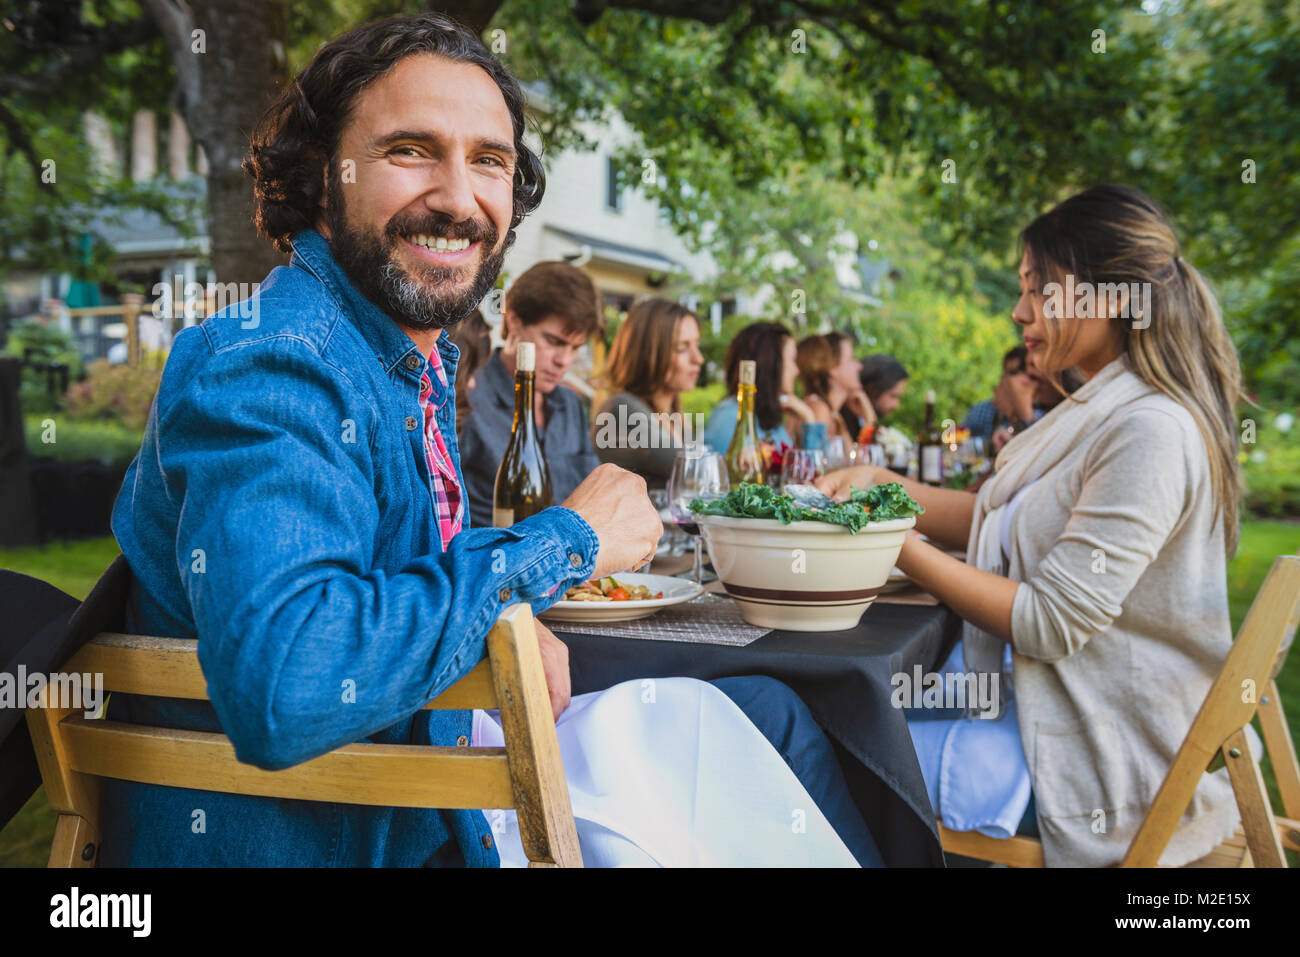 Portrait of smiling man at party outdoors Stock Photo